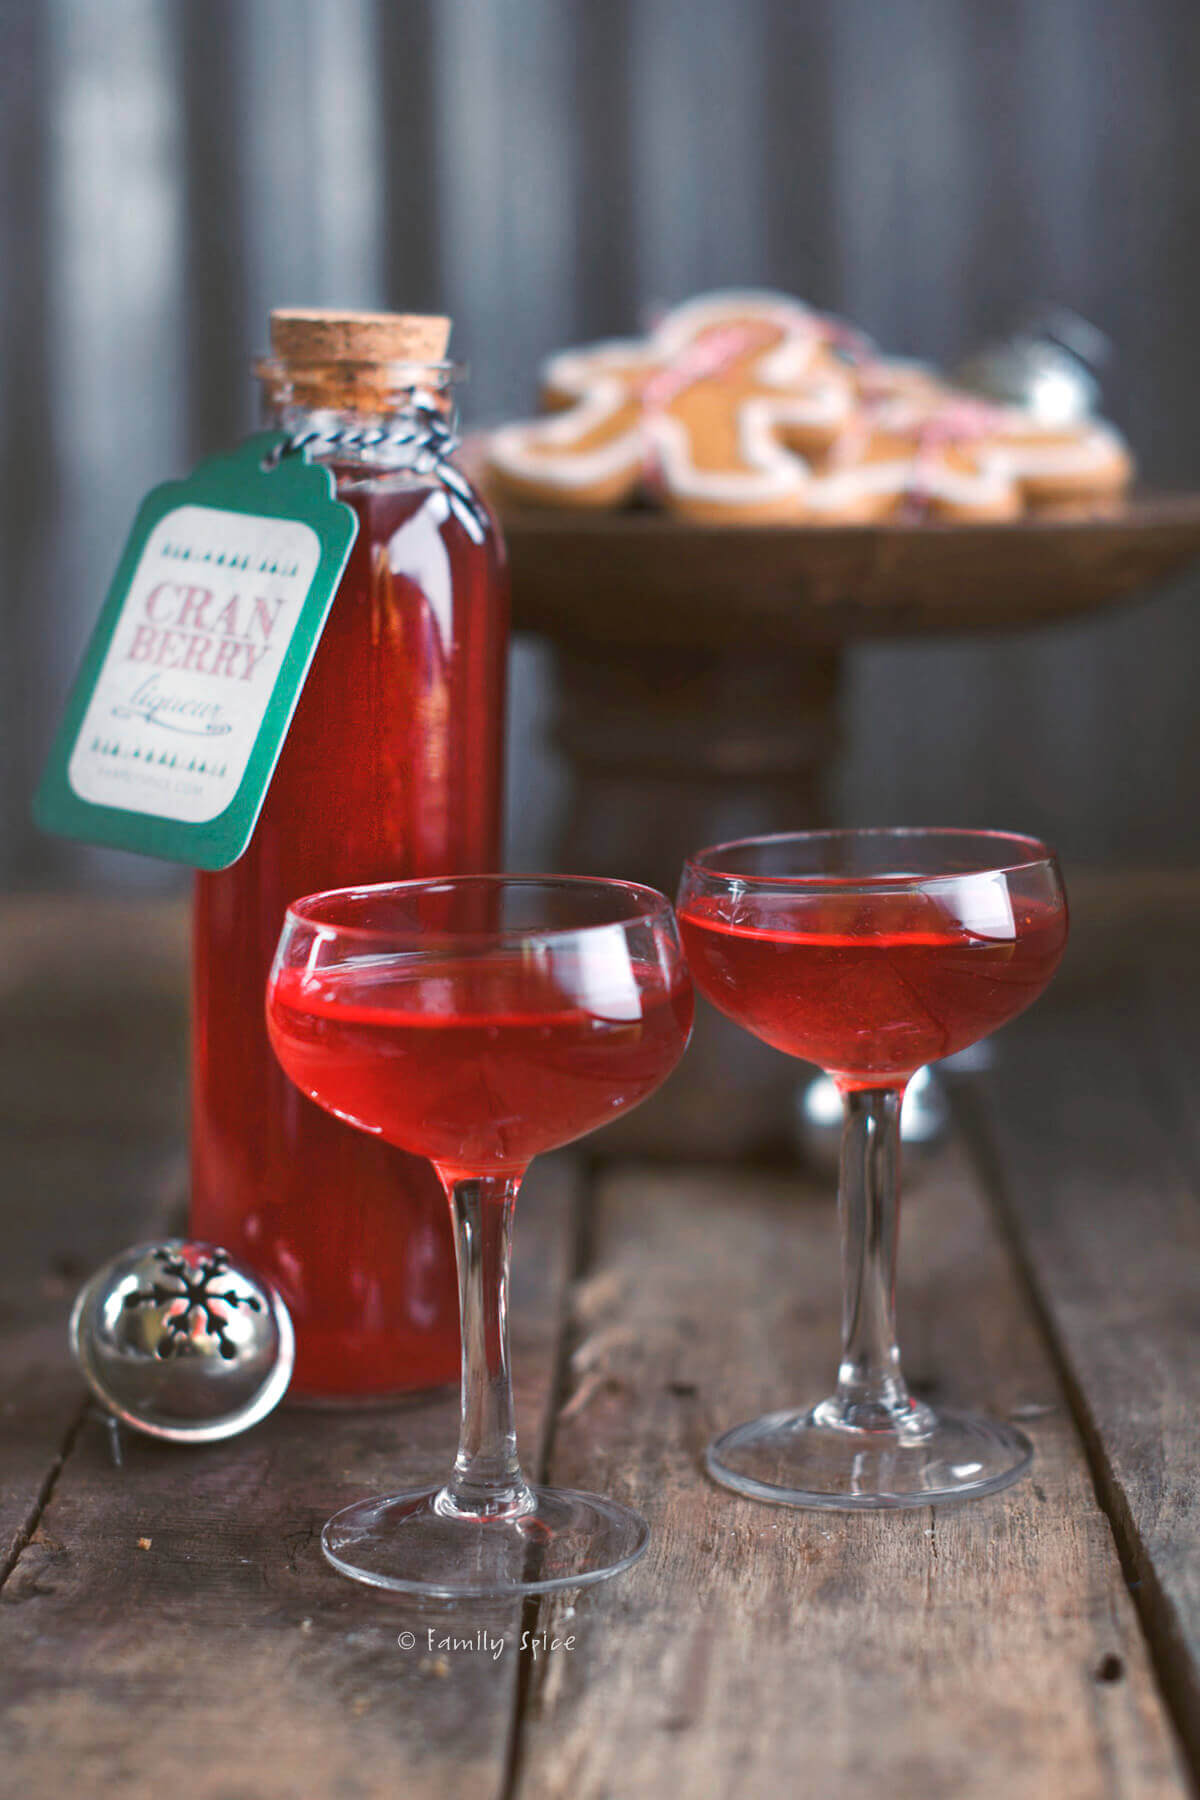 A bottle of cranberry liqueur with two small stemmed glasses filled with it and cookies behind it